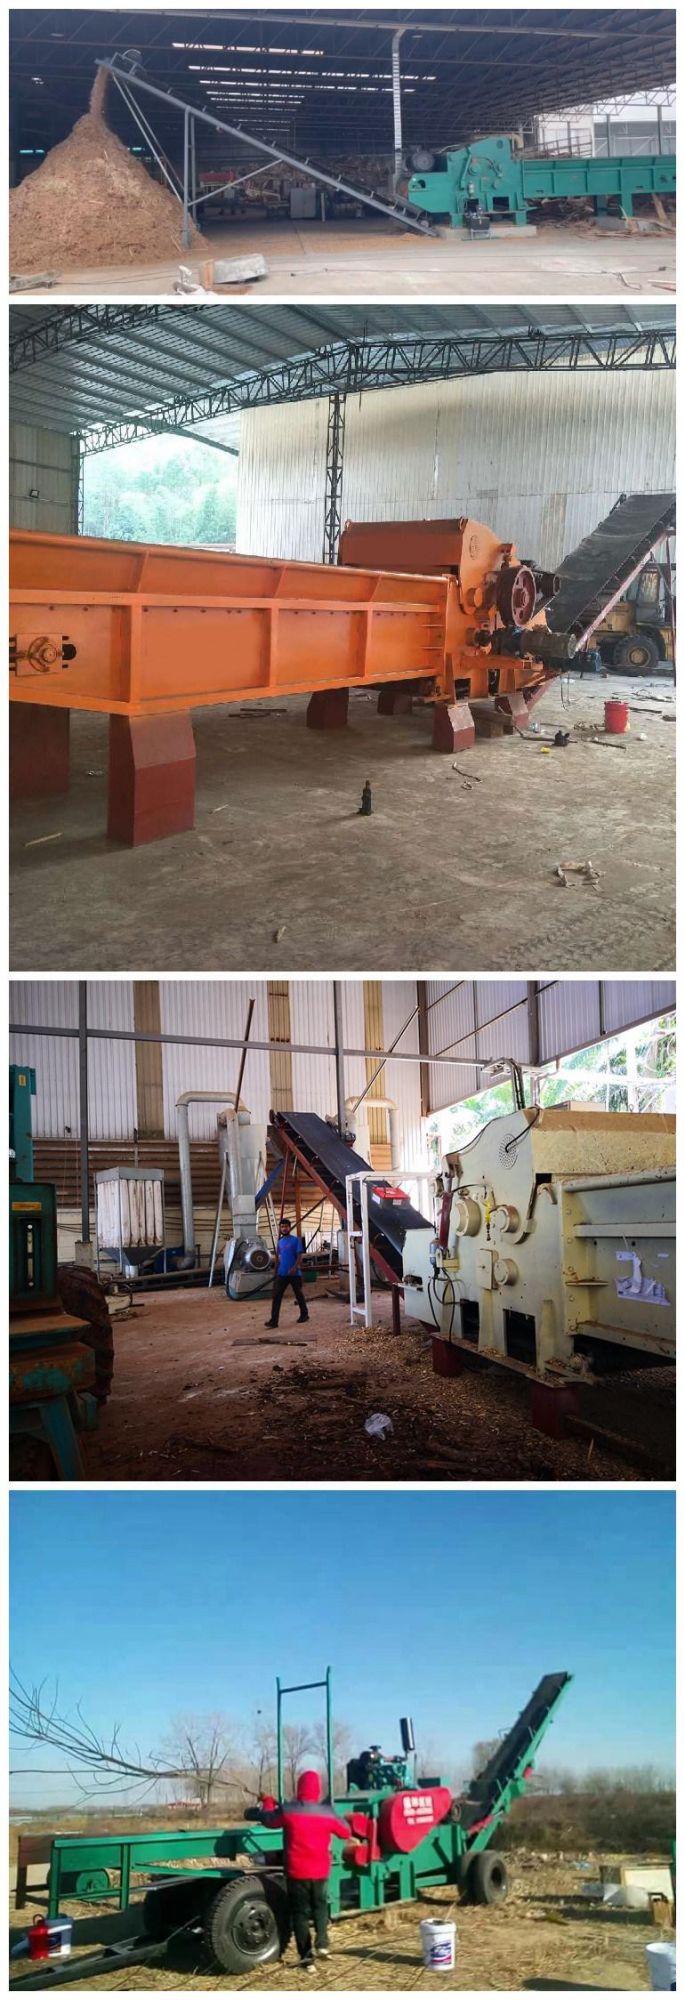 Professional Wood Chipper Manufacturer with High Quality High Capacity